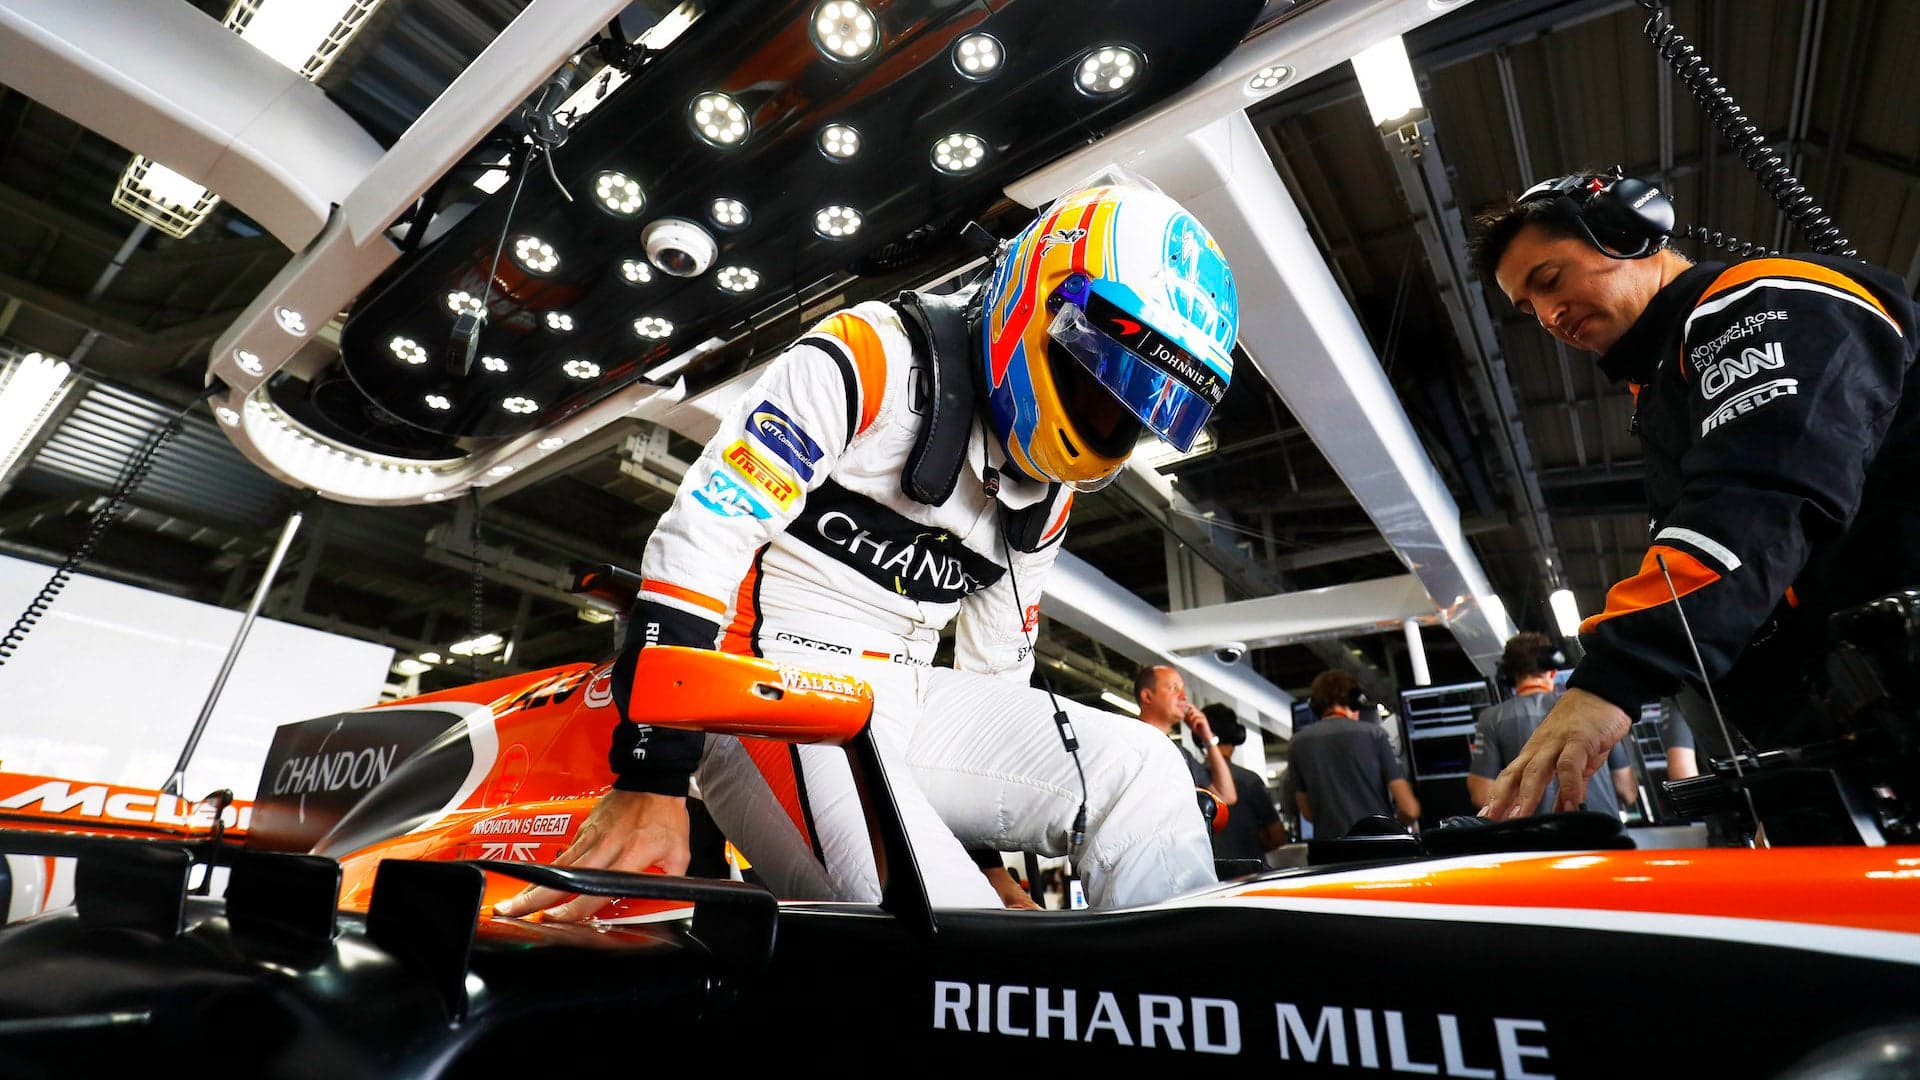 This Is What It’s Like to Be a VIP at the McLaren-Renault F1 Garage